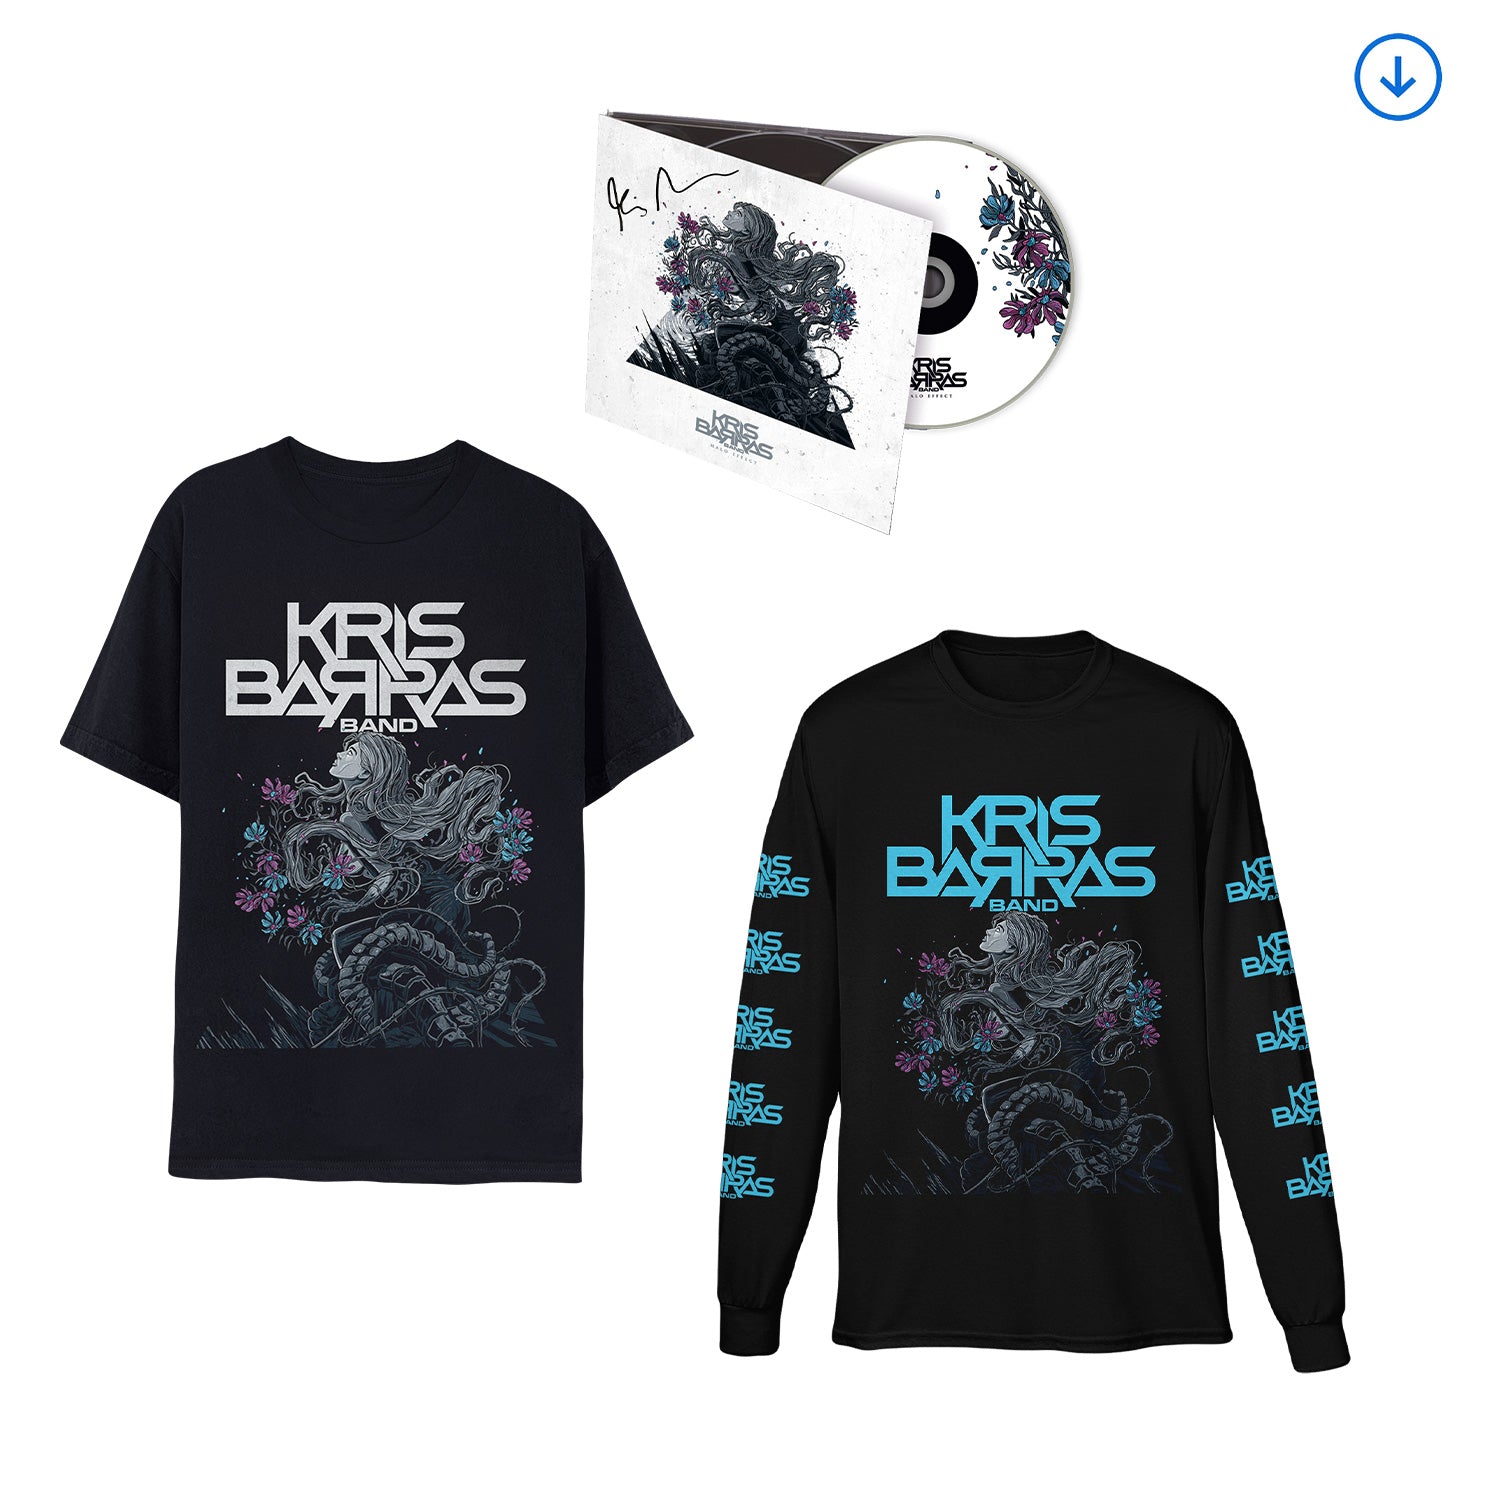 Kris Barras Band "Halo Effect" Signed CD, Download & Short or Long Sleeve T shirt